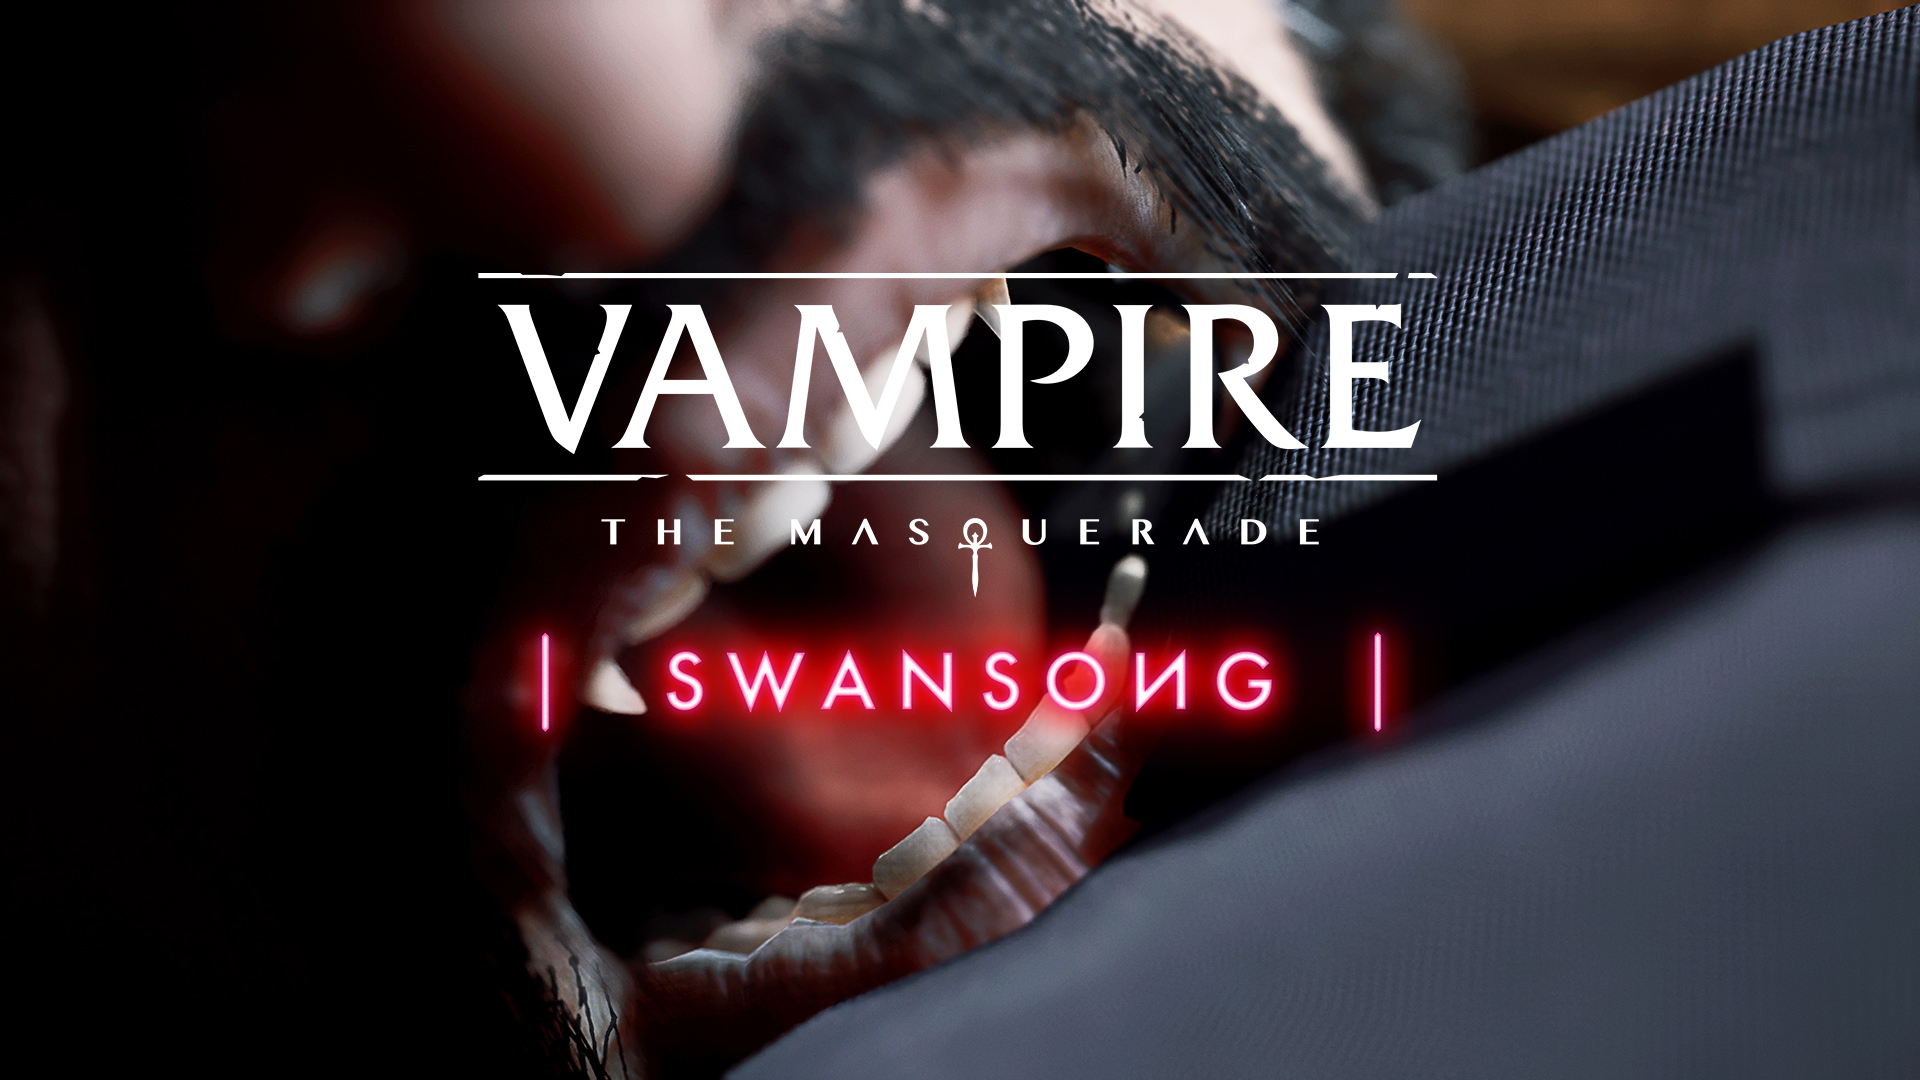 Vampire The Masquerade Swansong 2021 Game Wallpapers